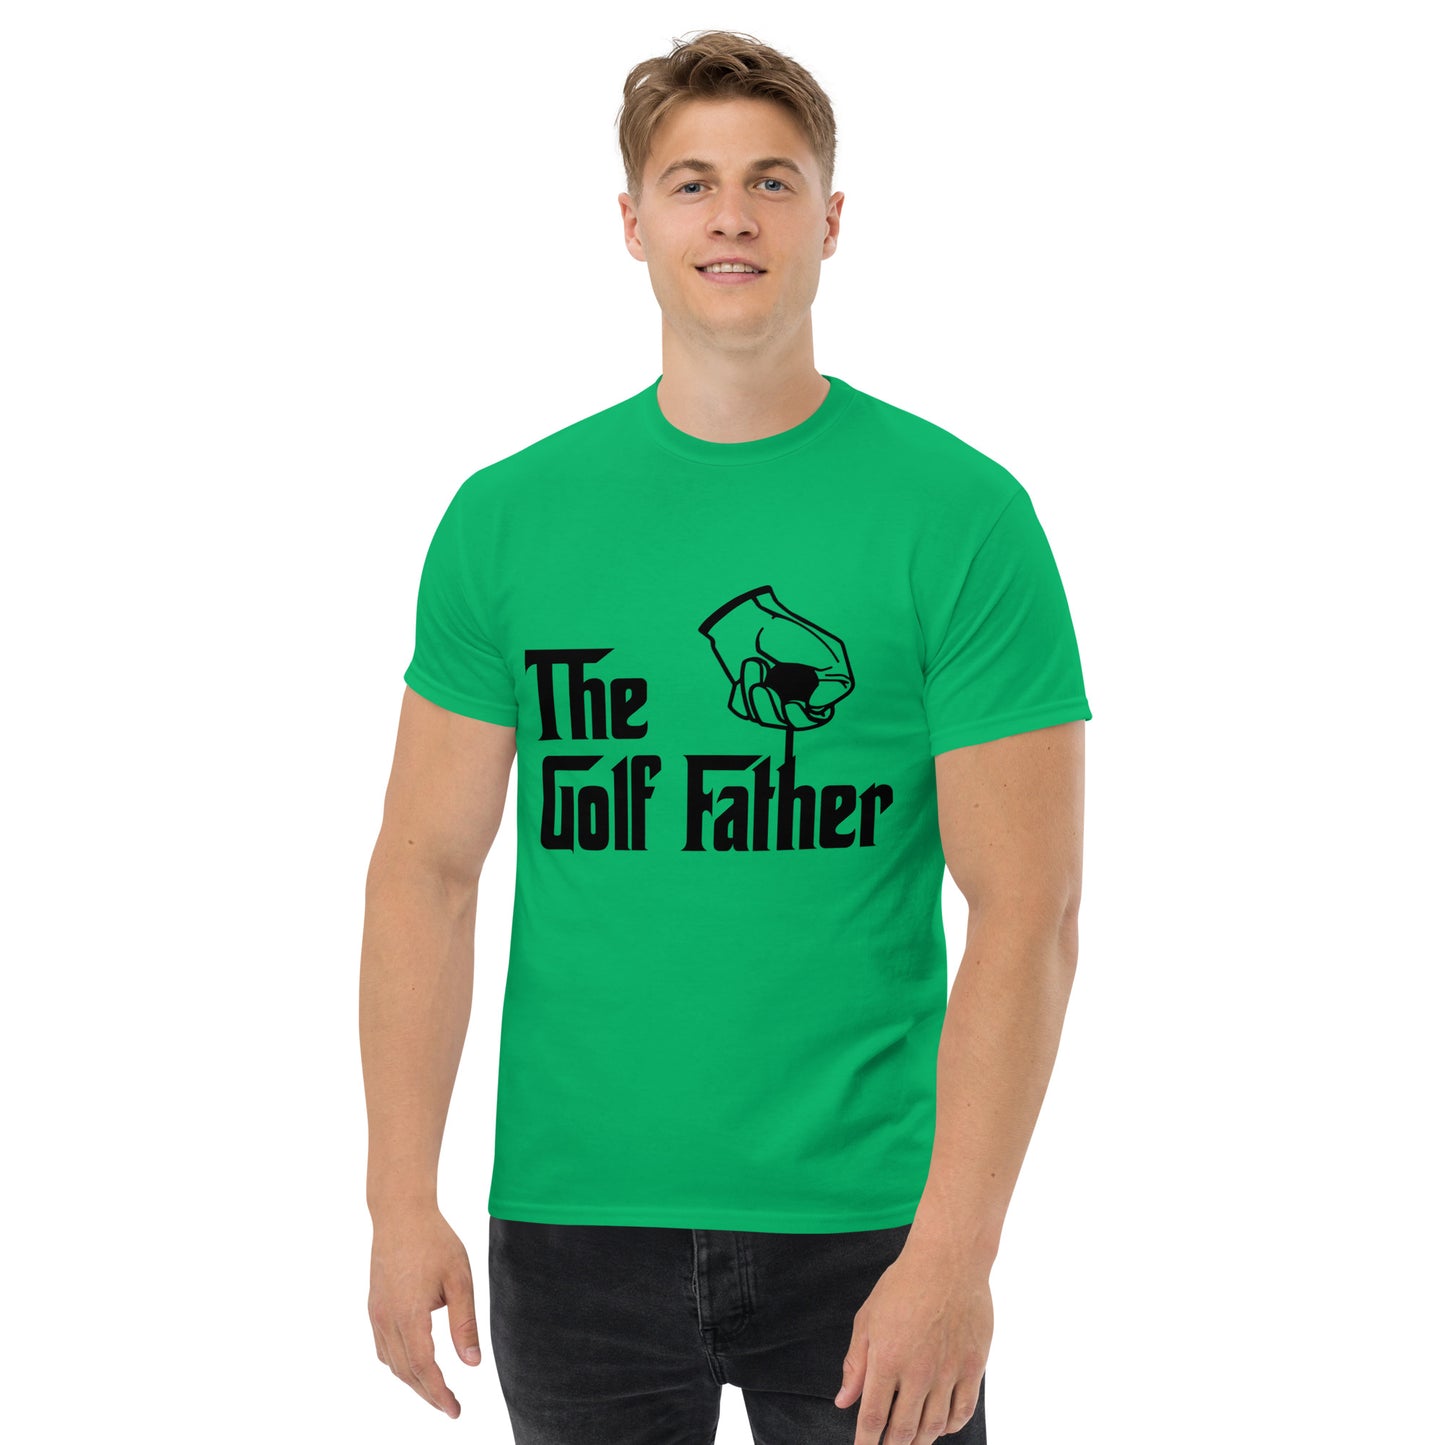 The Golf Father T-Shirt